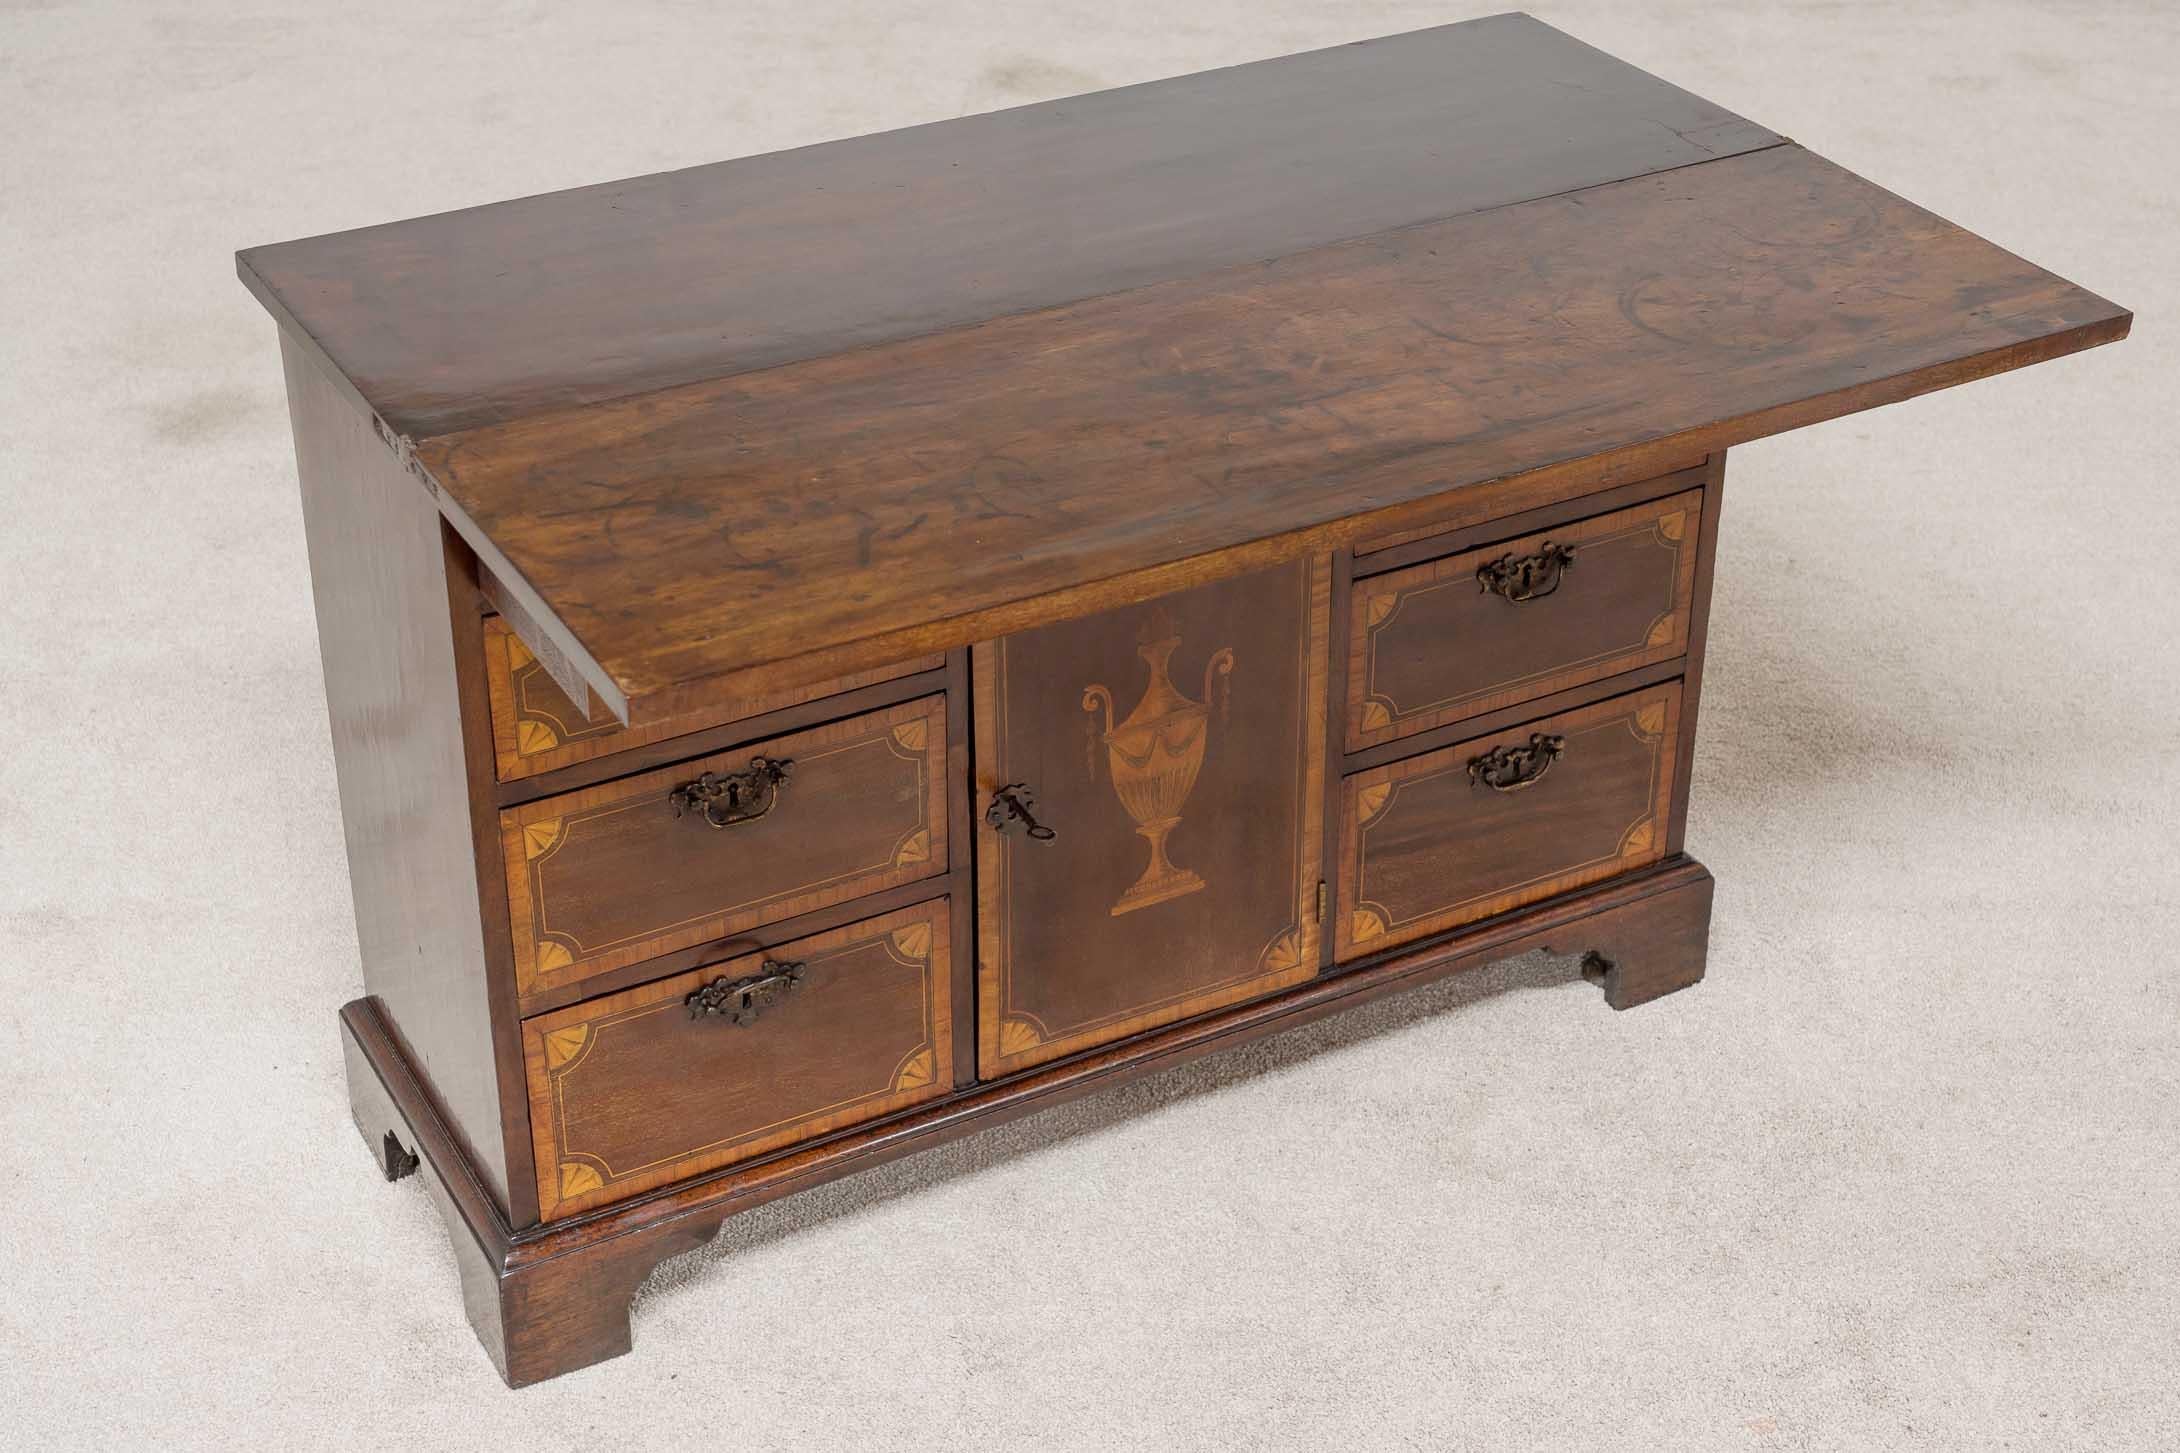 Early 19th Century Georgian Bachelors Chest Mahogany Inlay Bedside Cabinet 1820